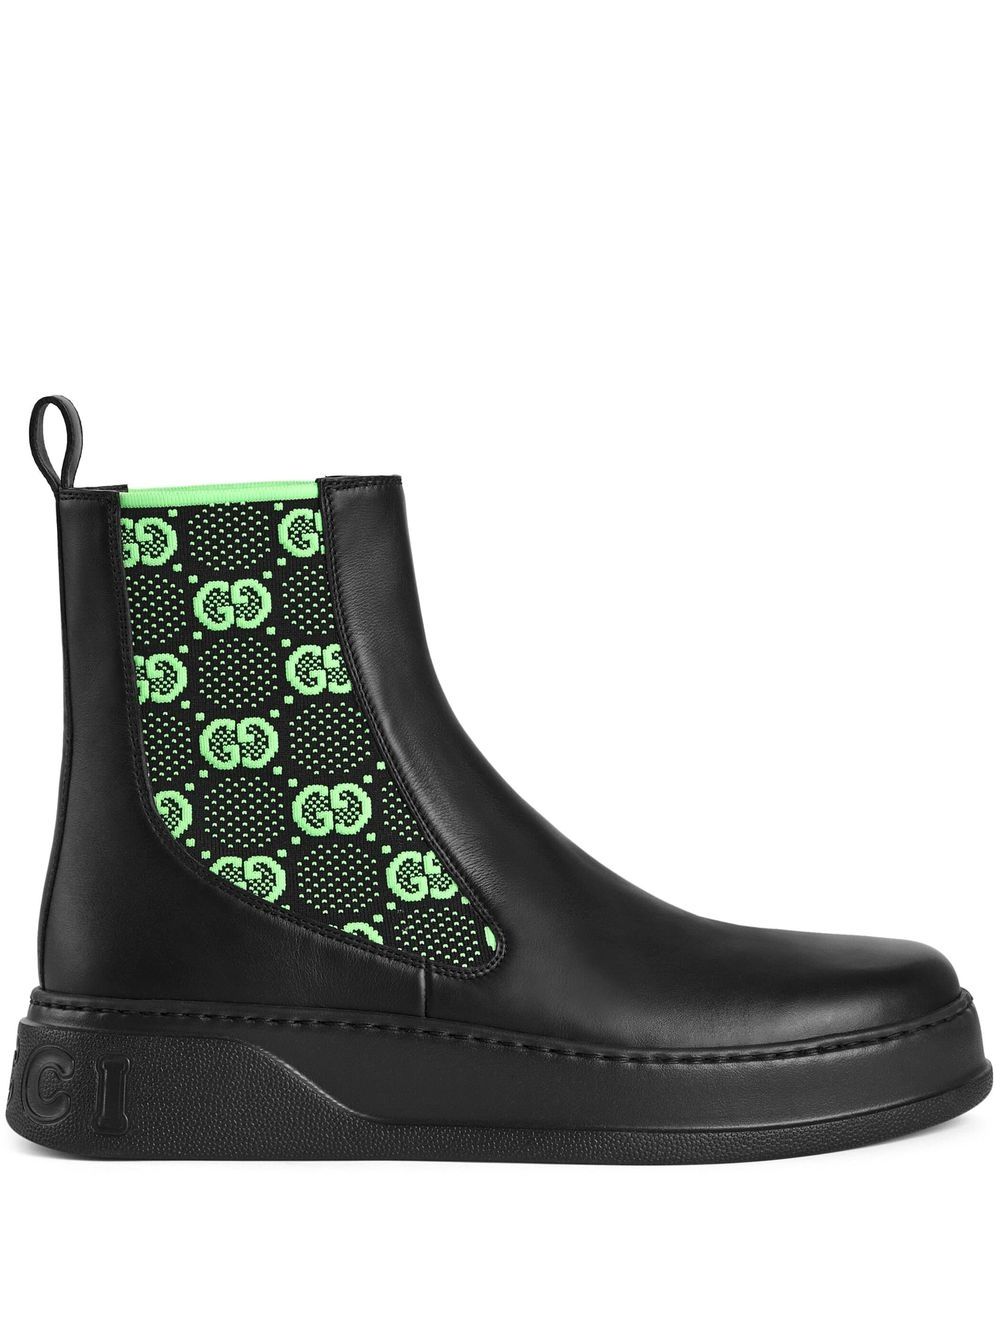 GG Supreme ankle boots